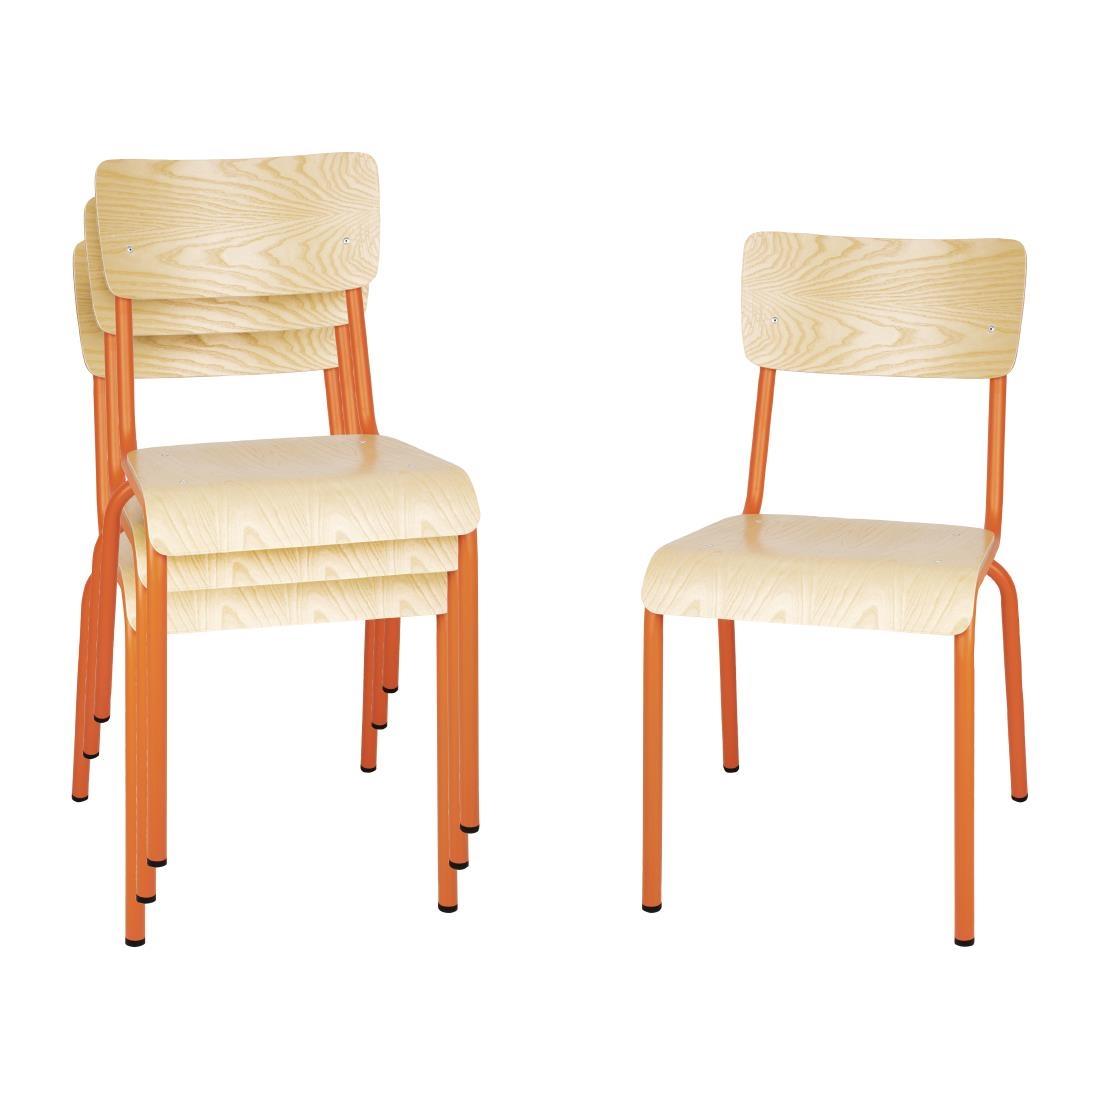 Bolero Cantina Side Chairs with Wooden Seat Pad and Backrest Orange (Pack of 4) - FB947  - 6